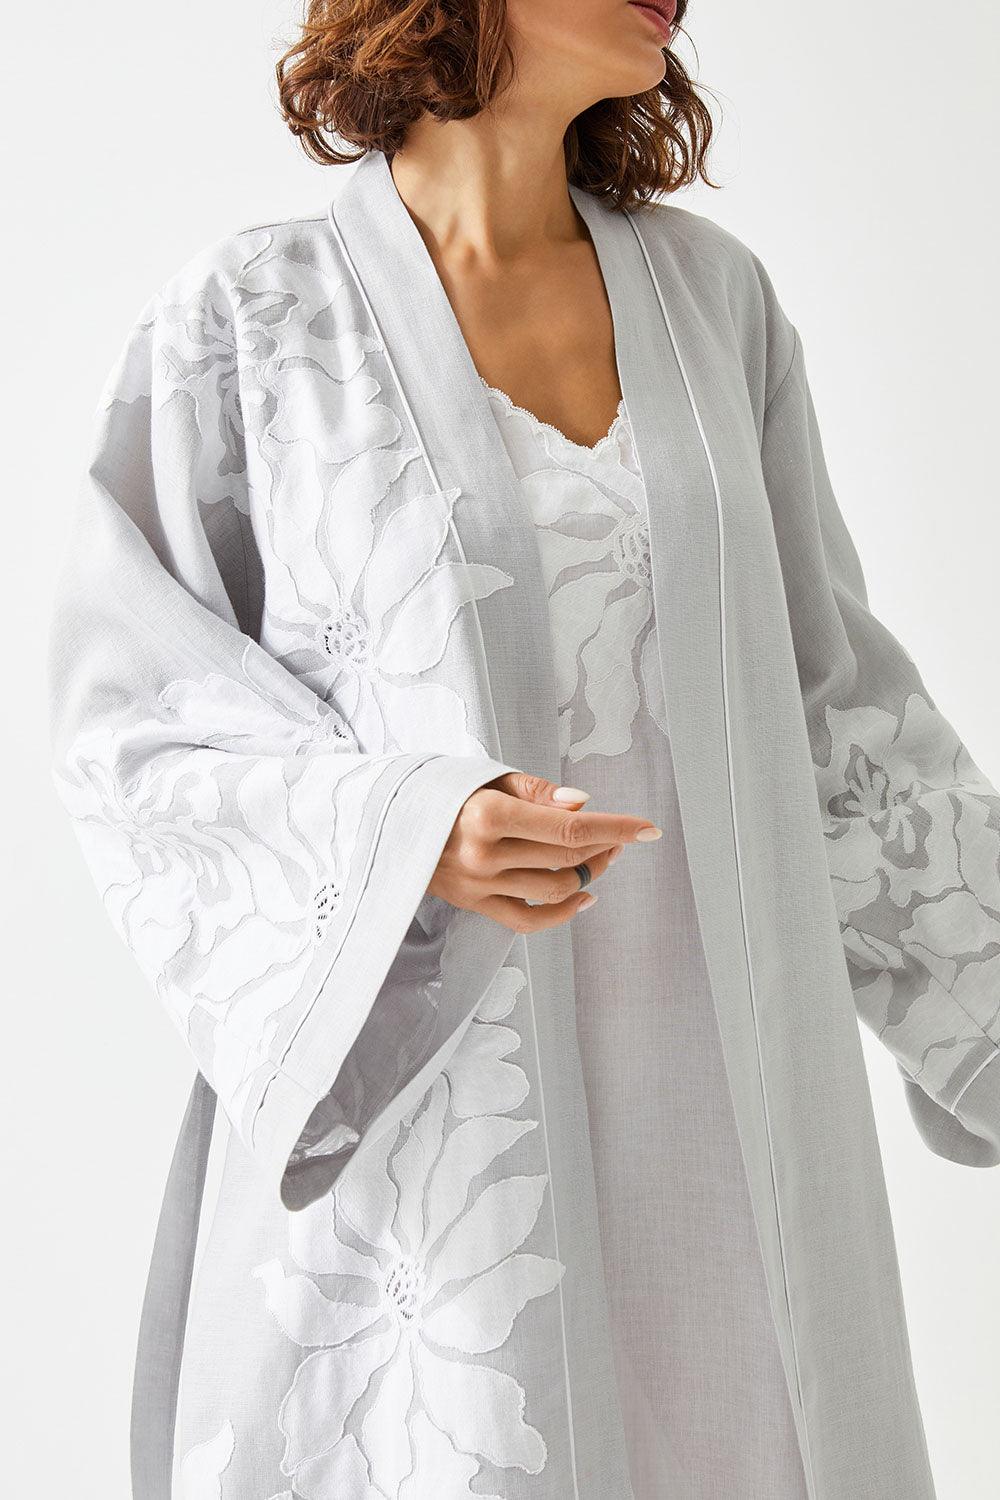 Acacia Long Linen Embroidered with Lace Kaftan Set - Bocan